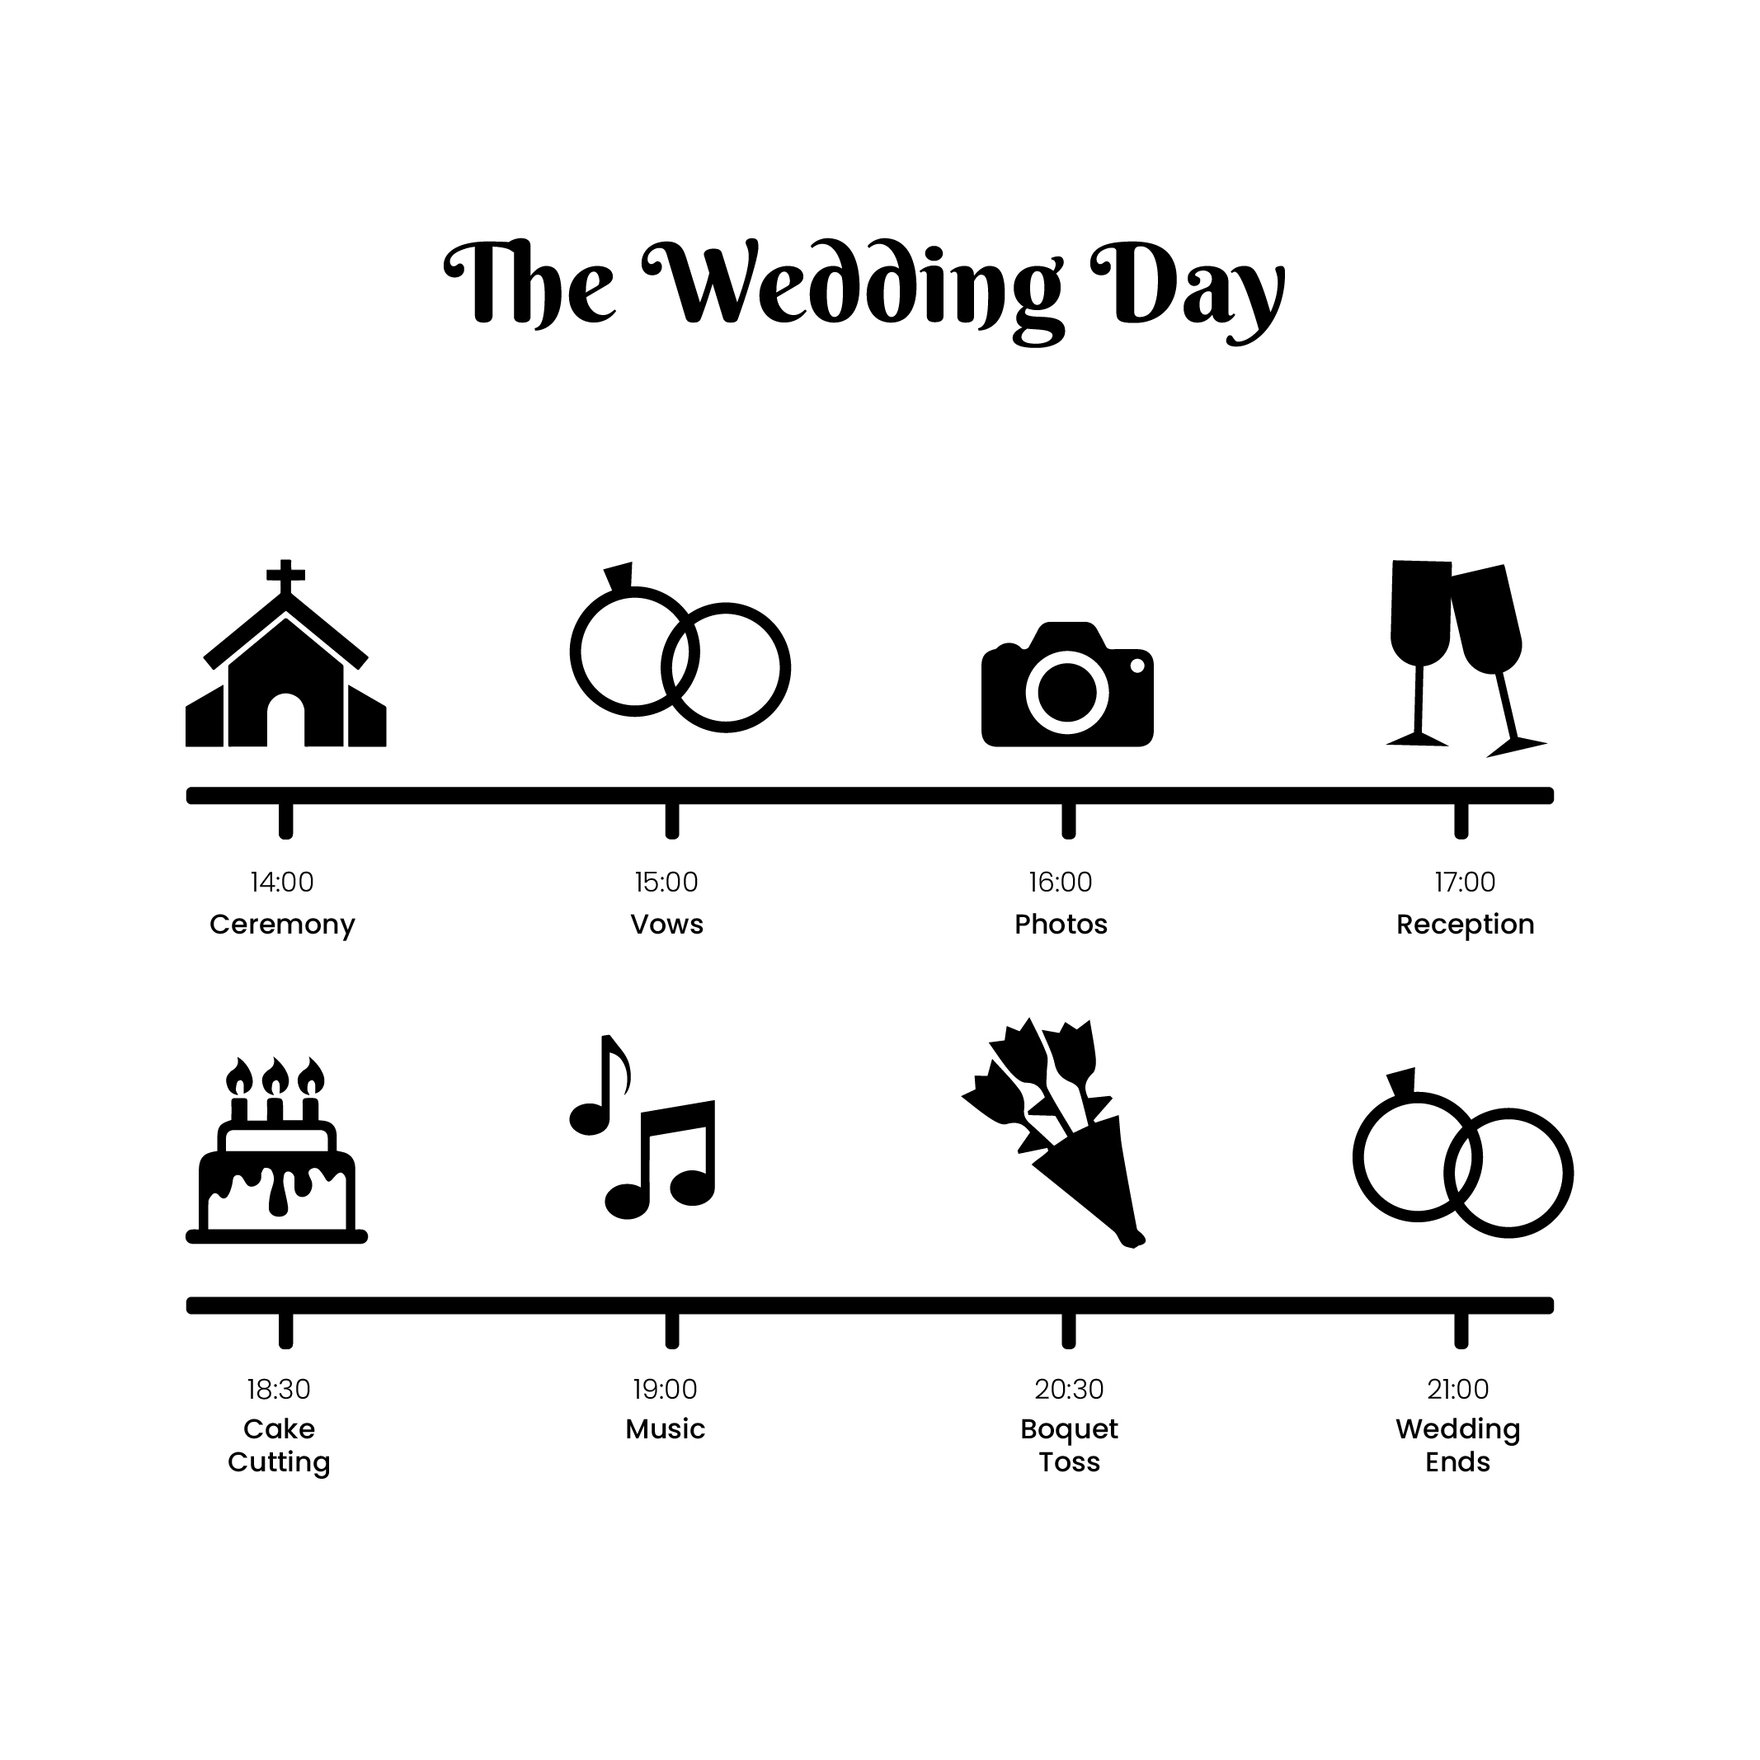 wedding party silhouette clip art free